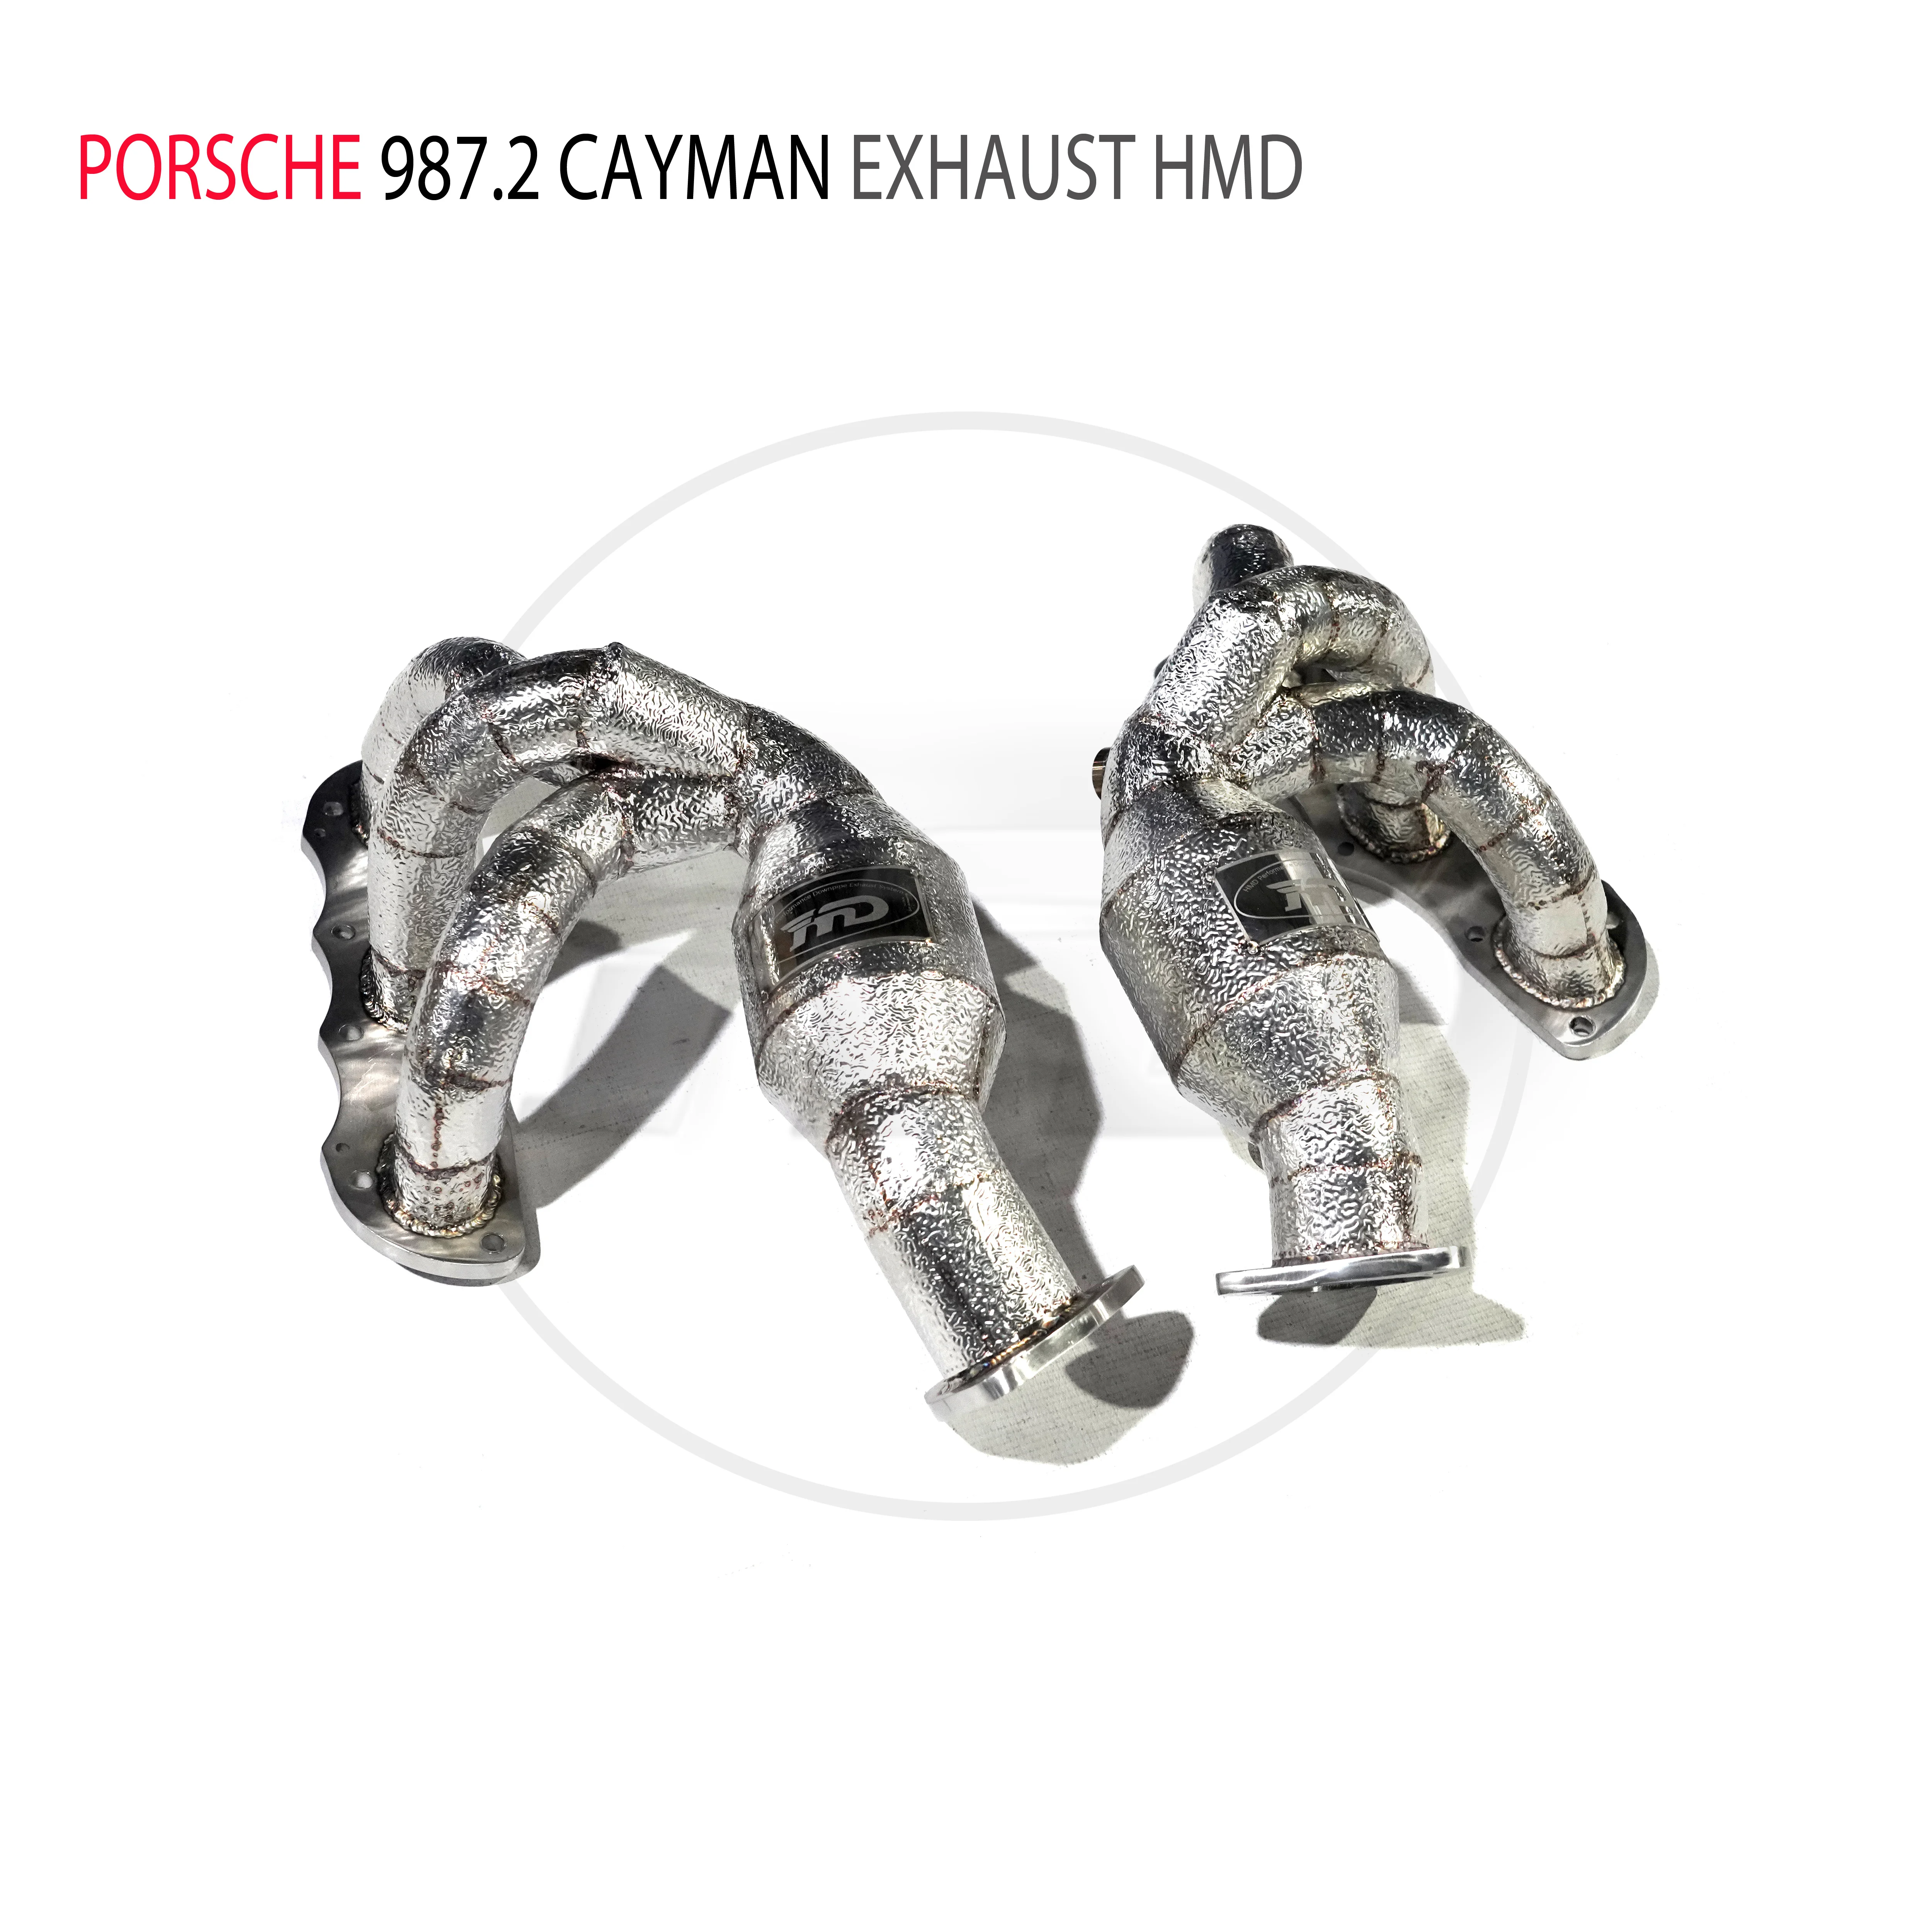 

HMD Exhaust Manifold High Flow Downpipe for Porsche 987.2 Cayman Boxster With Catalytic Converter Header Catless Pipe